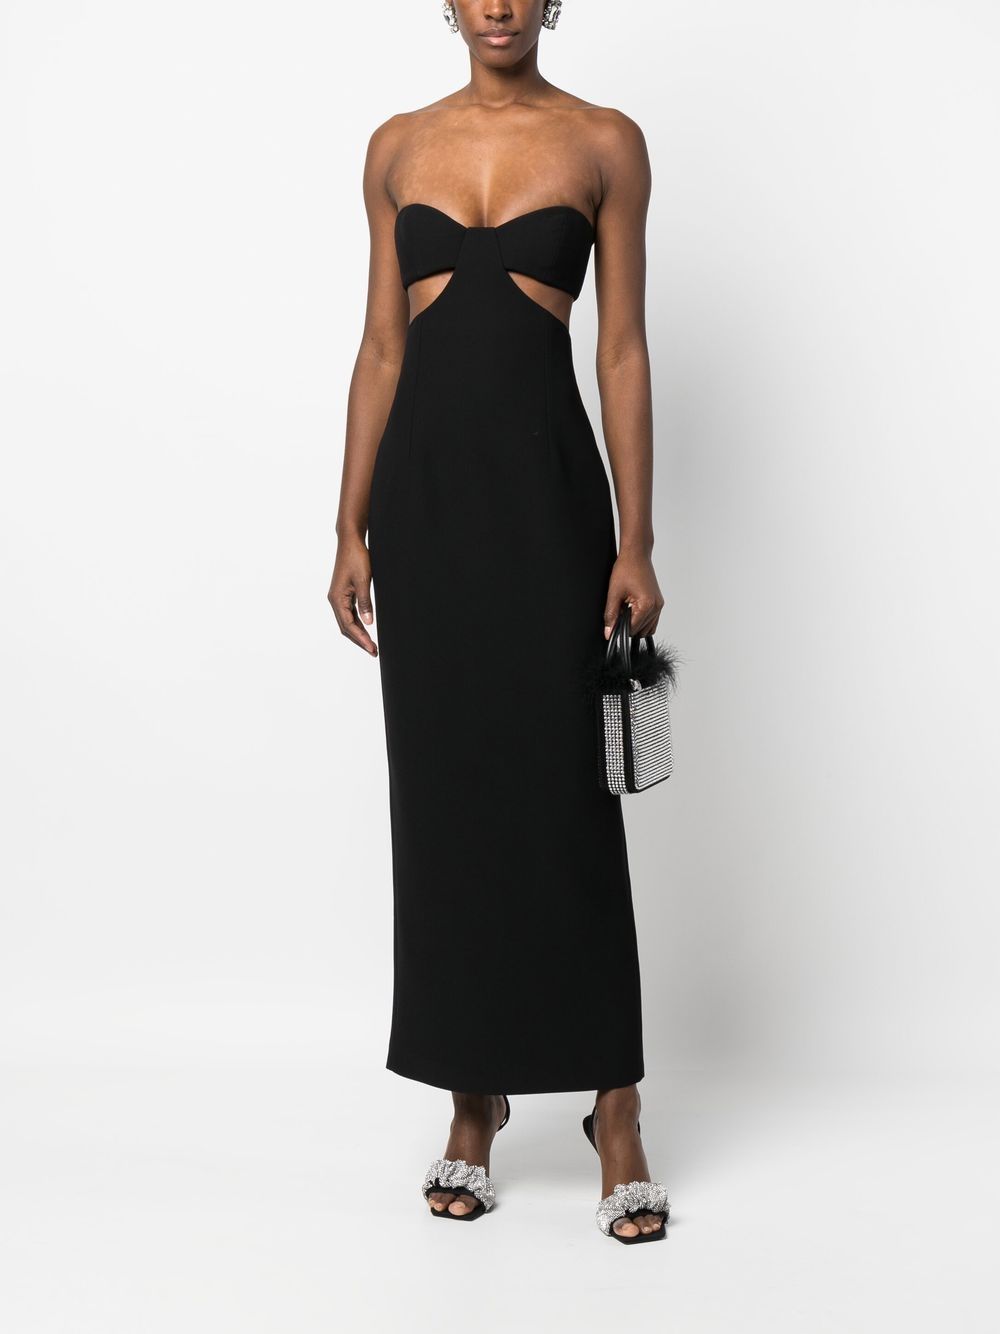 The New Arrivals by Ilkyaz Ozel THE NEW ARRIVALS BY ILKYAZ OZEL- Strapless Cut Out Long Dress